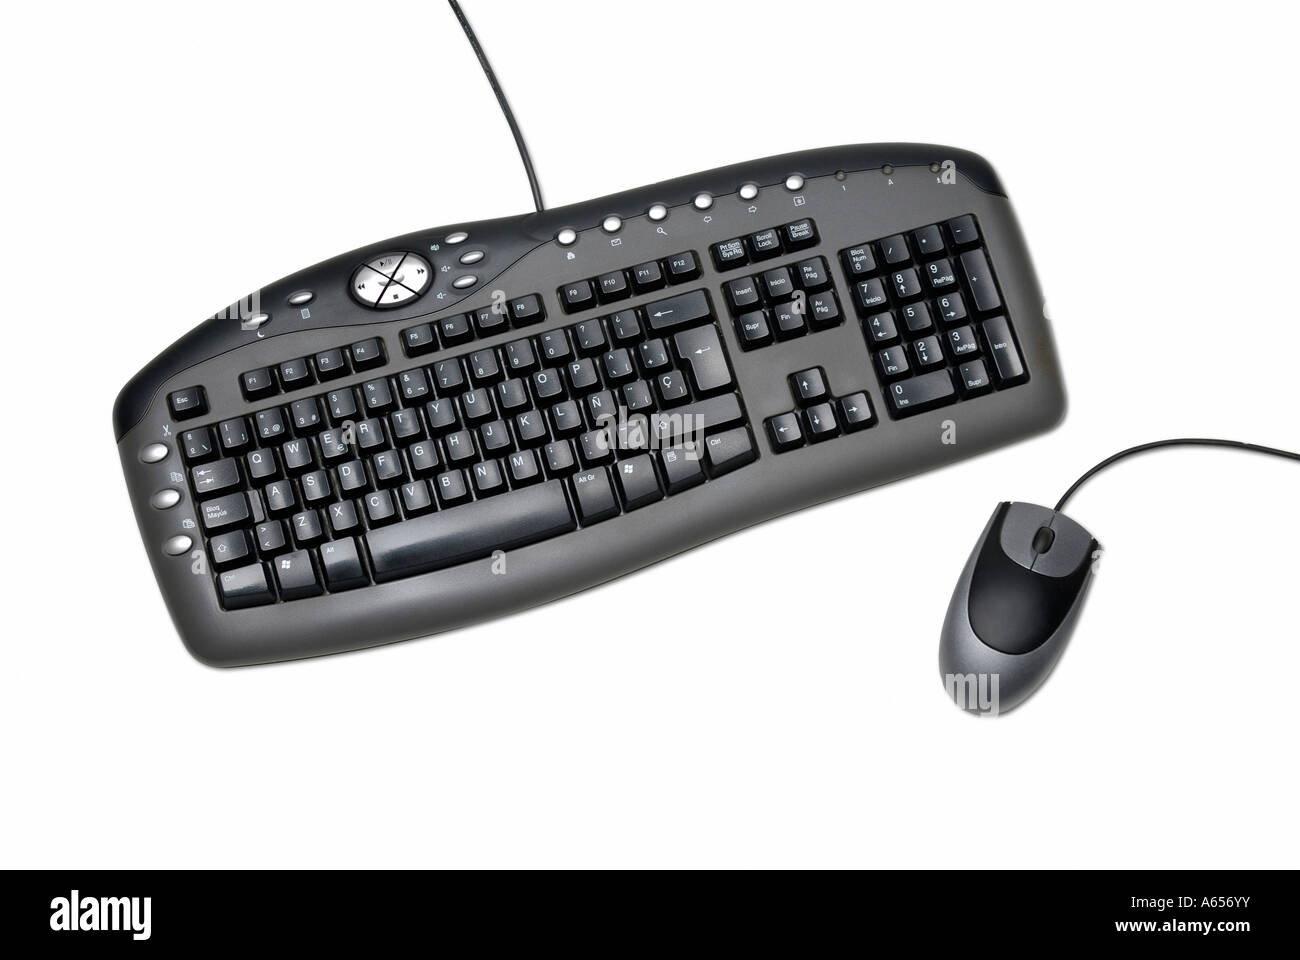 COMPUTER KEYBOARD AND MOUSE ON WHITE BACKGROUND Stock Photo